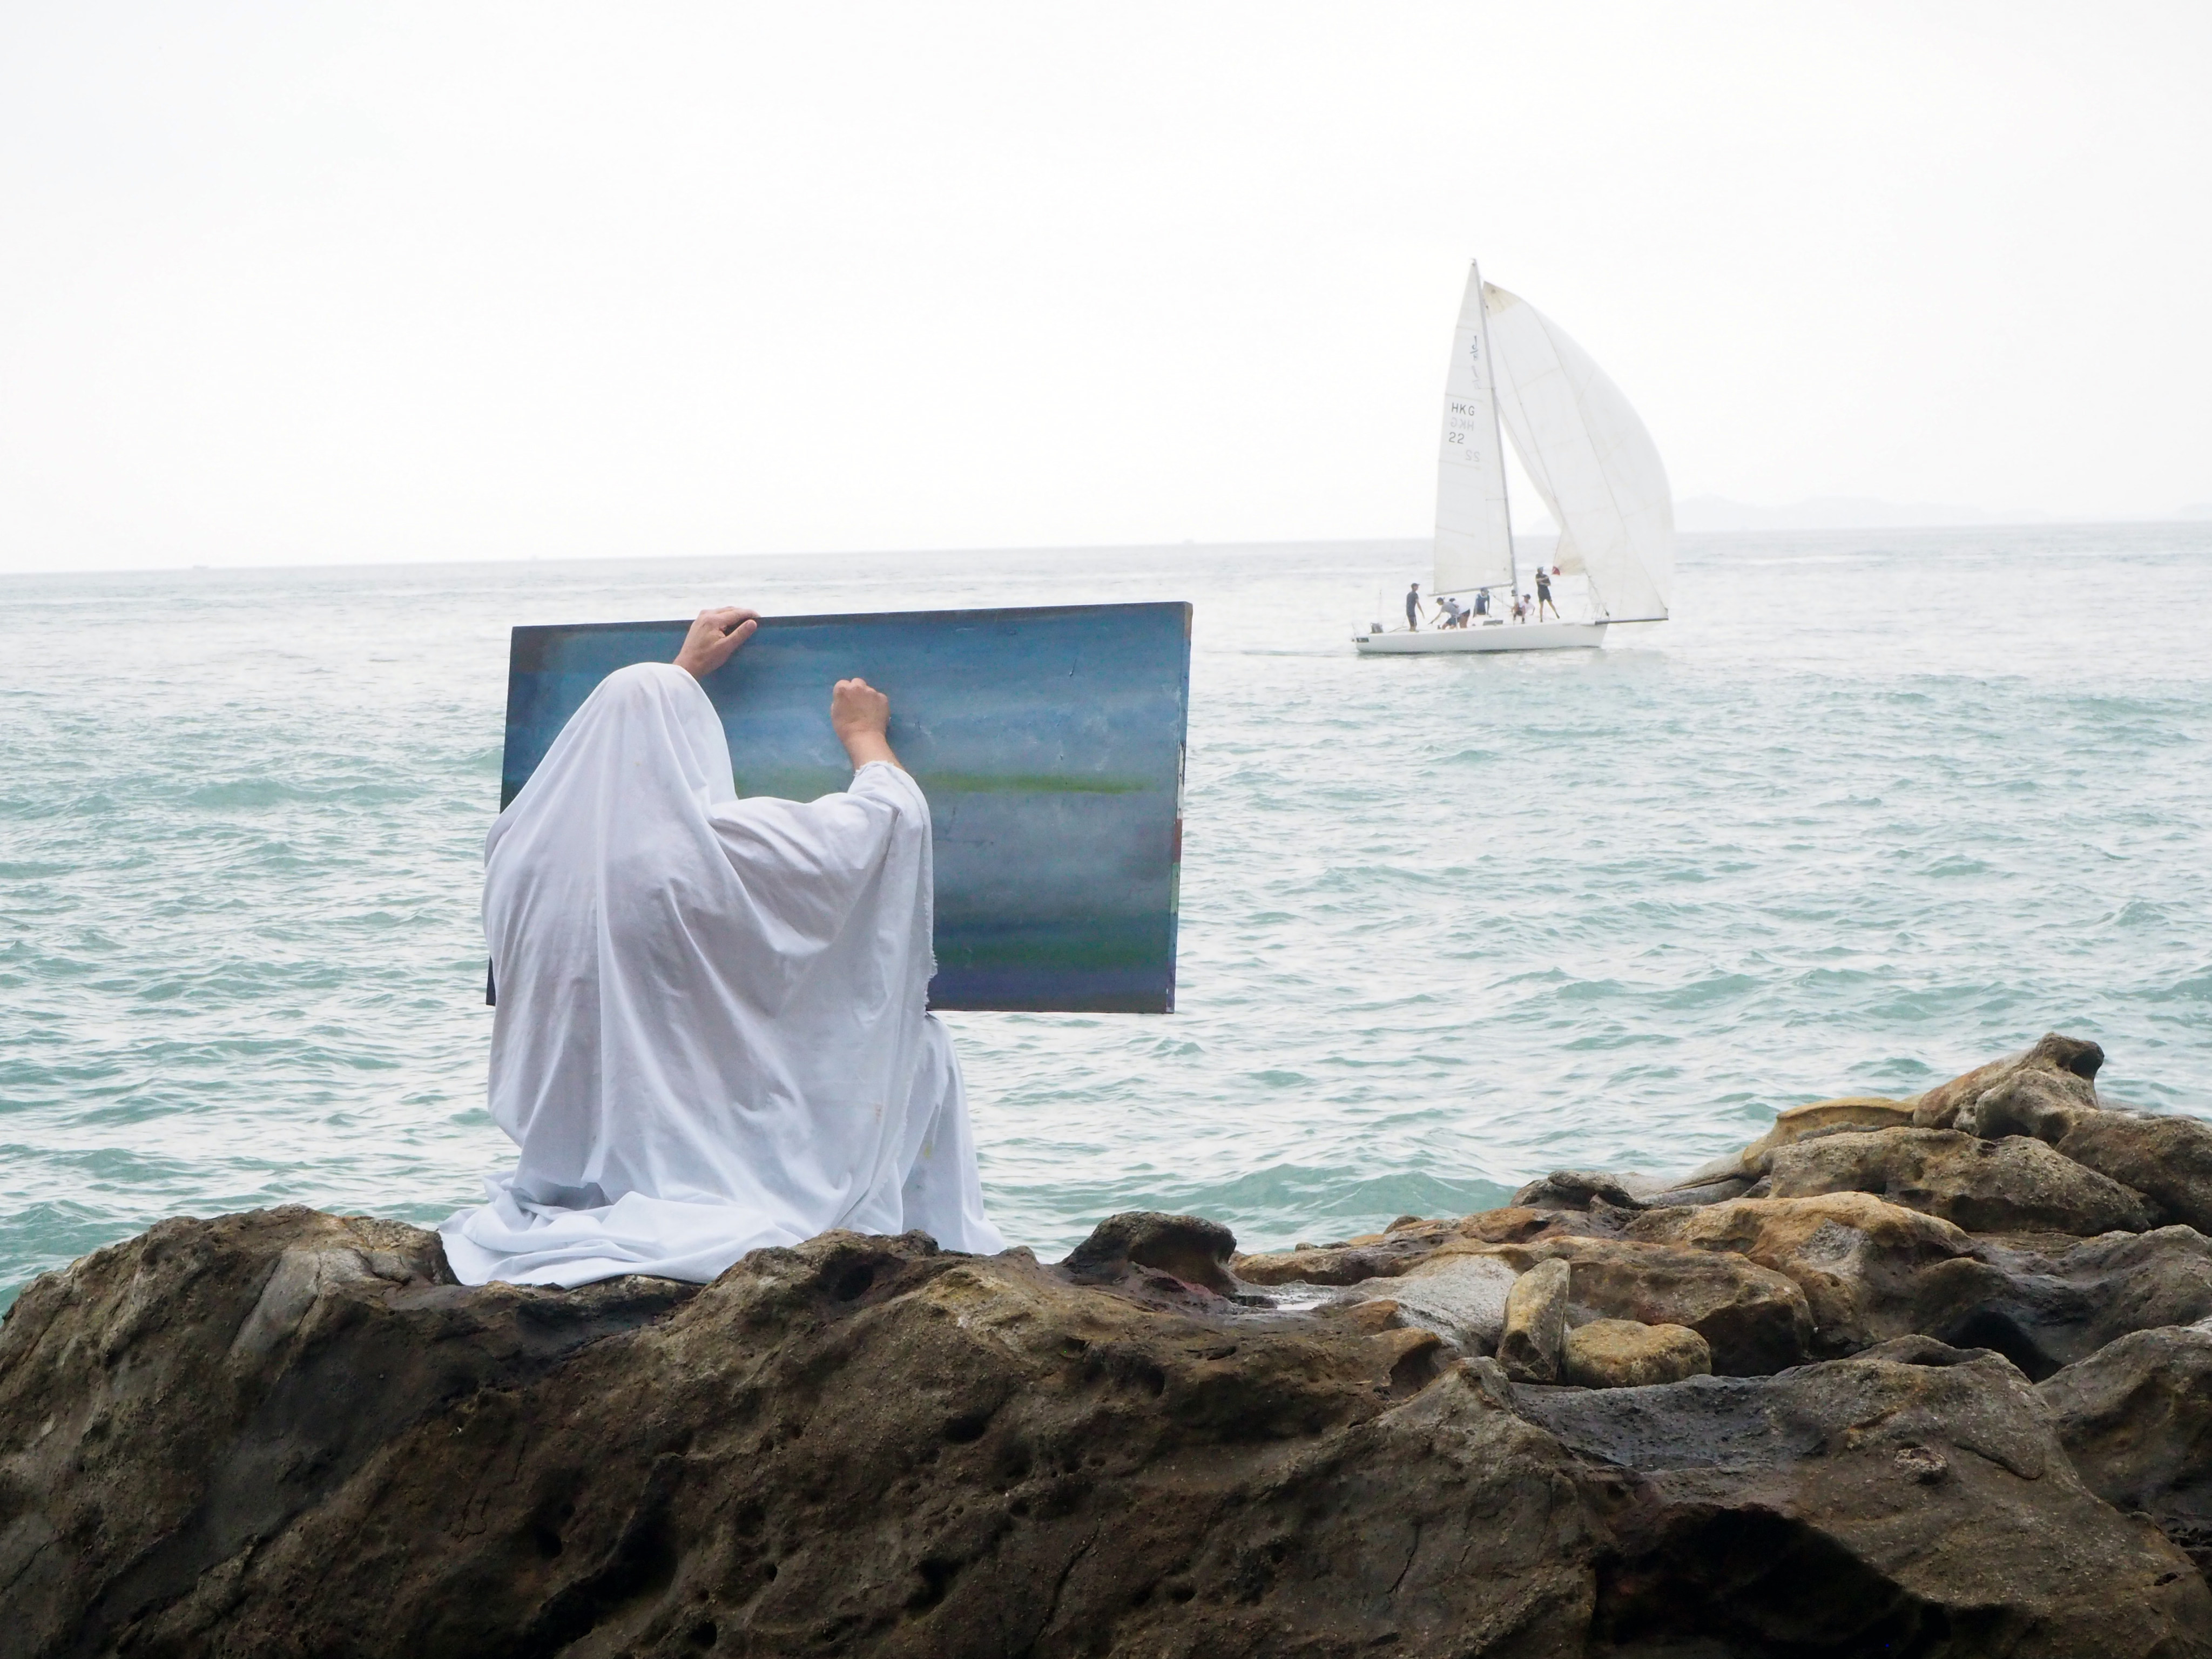 Belgium-based Spanish artist Angel Vergara paints a sea scene in Hong Kong while covered in his signature white cloth. Photo: Axel Vervoordt Gallery